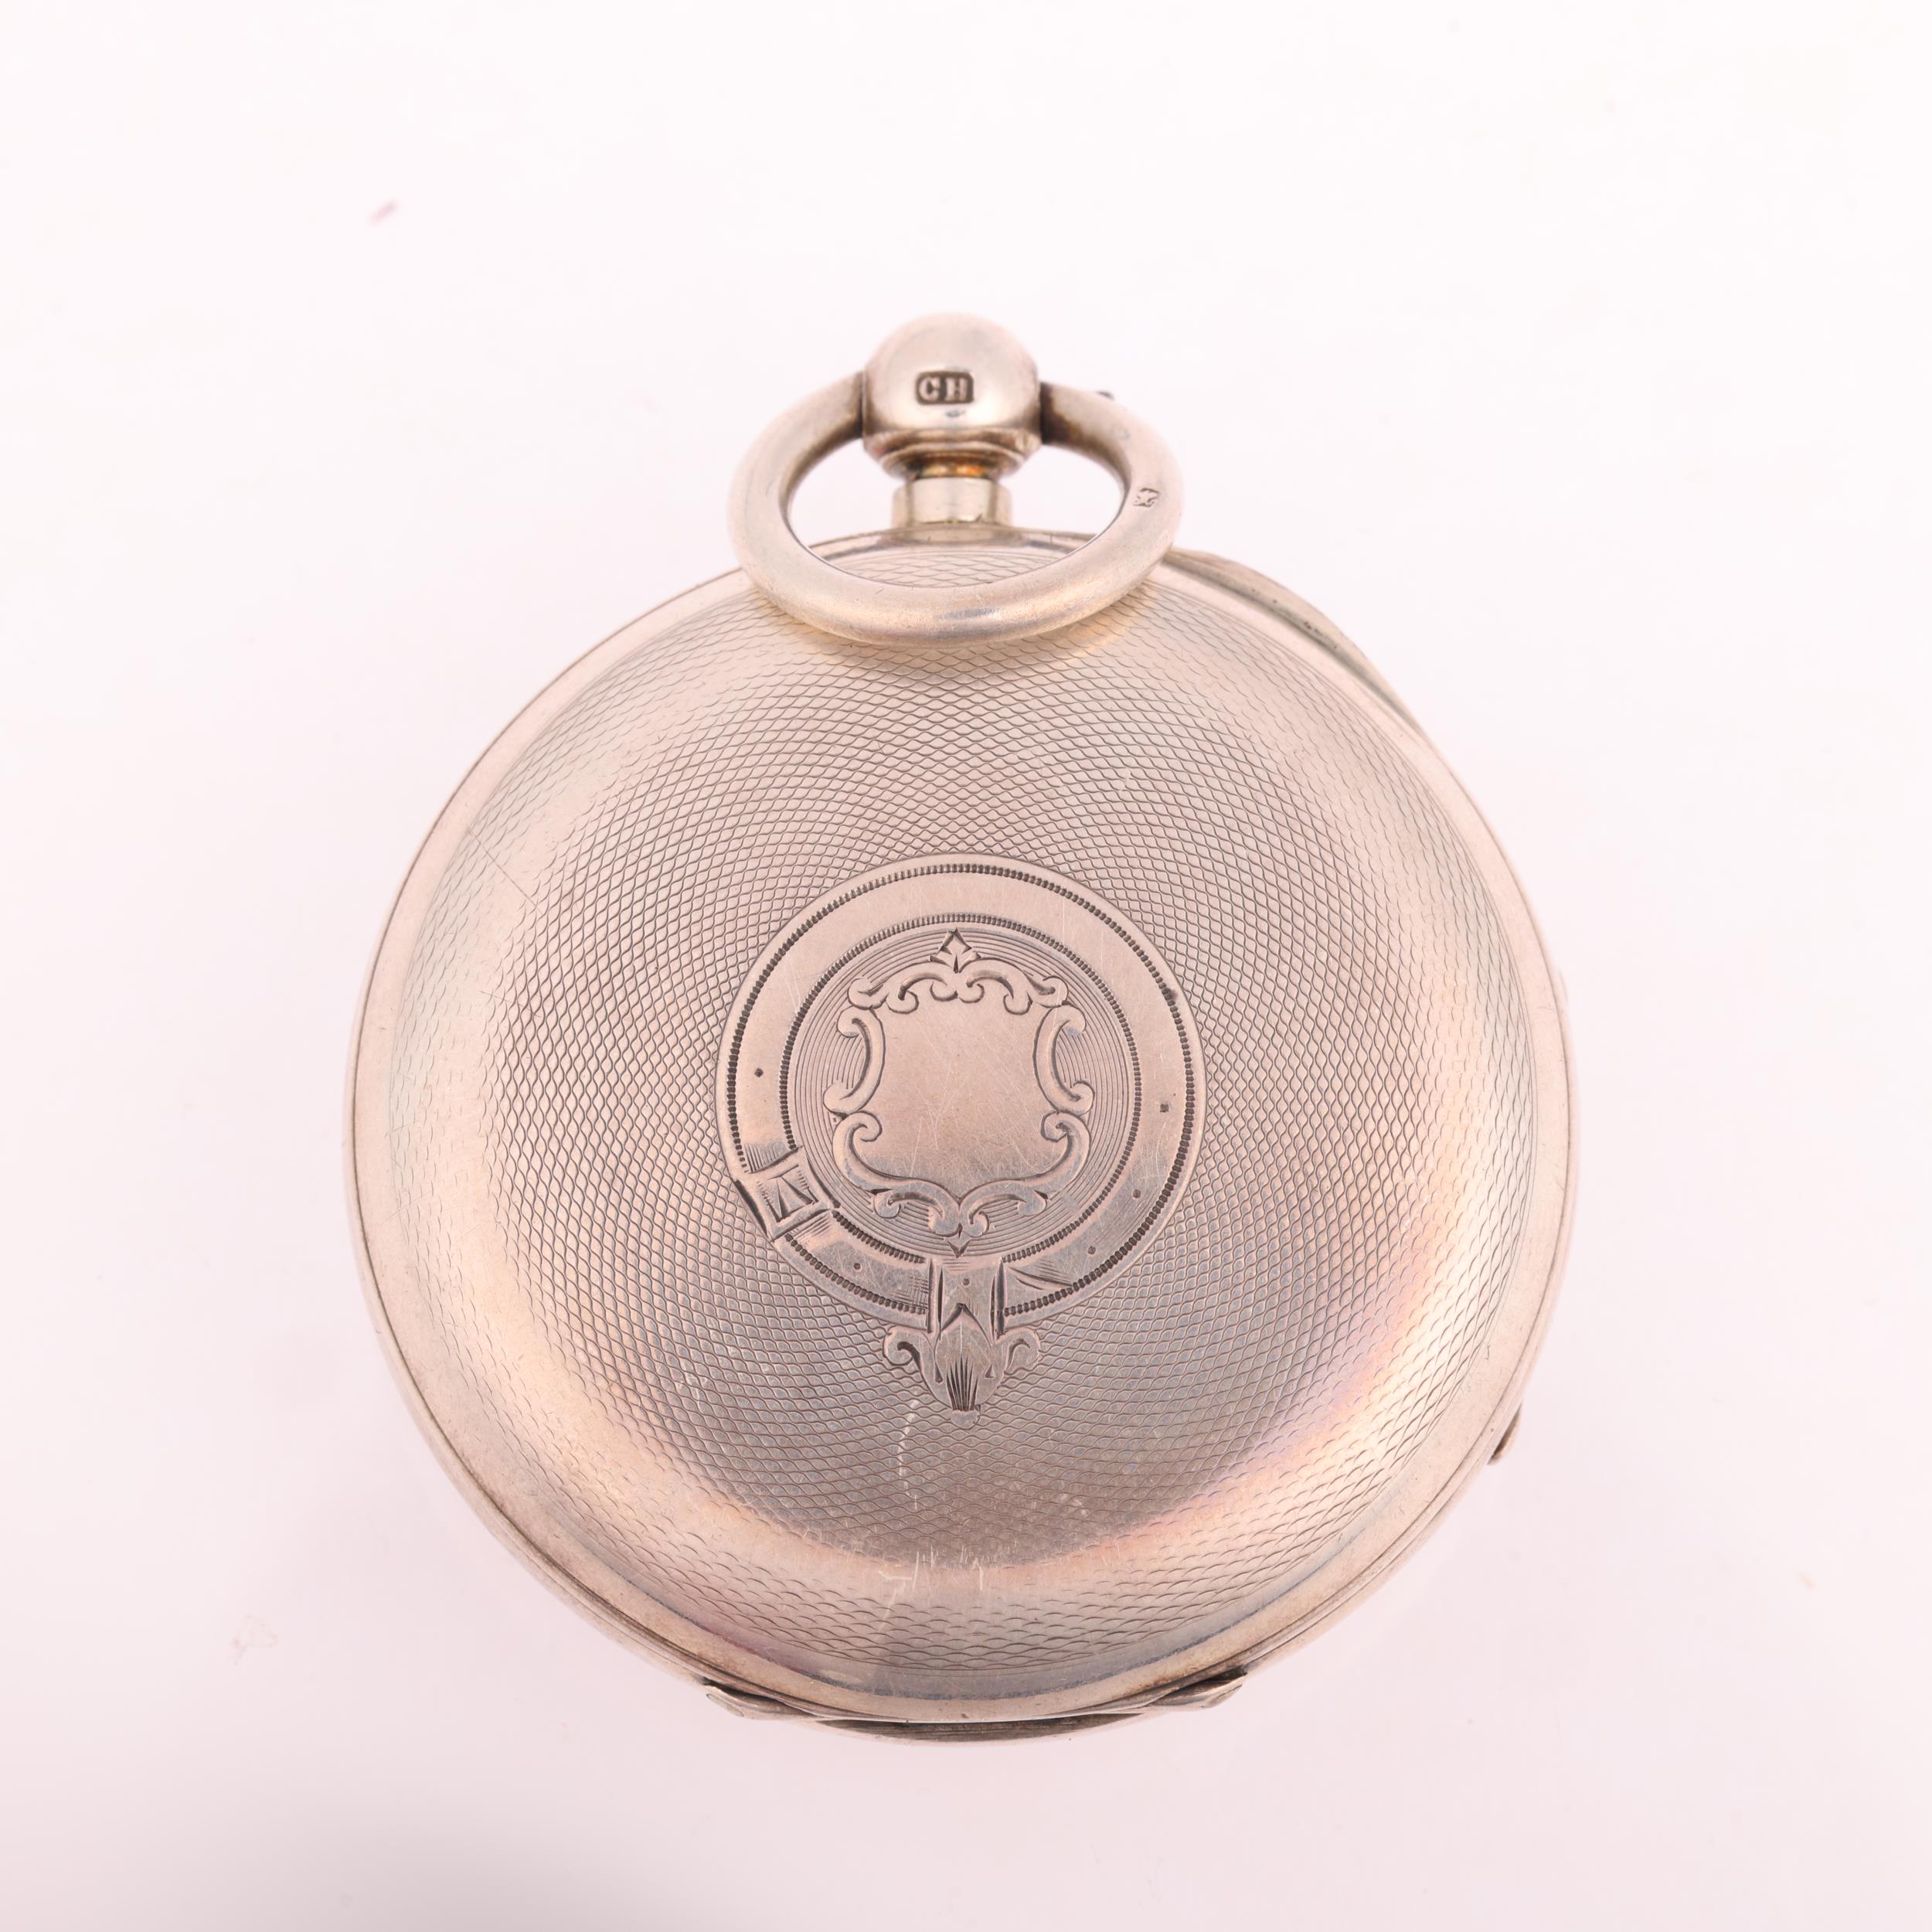 J W BENSON - a late 19th century silver open-face key-wind pocket watch, white enamel dial with - Image 2 of 5